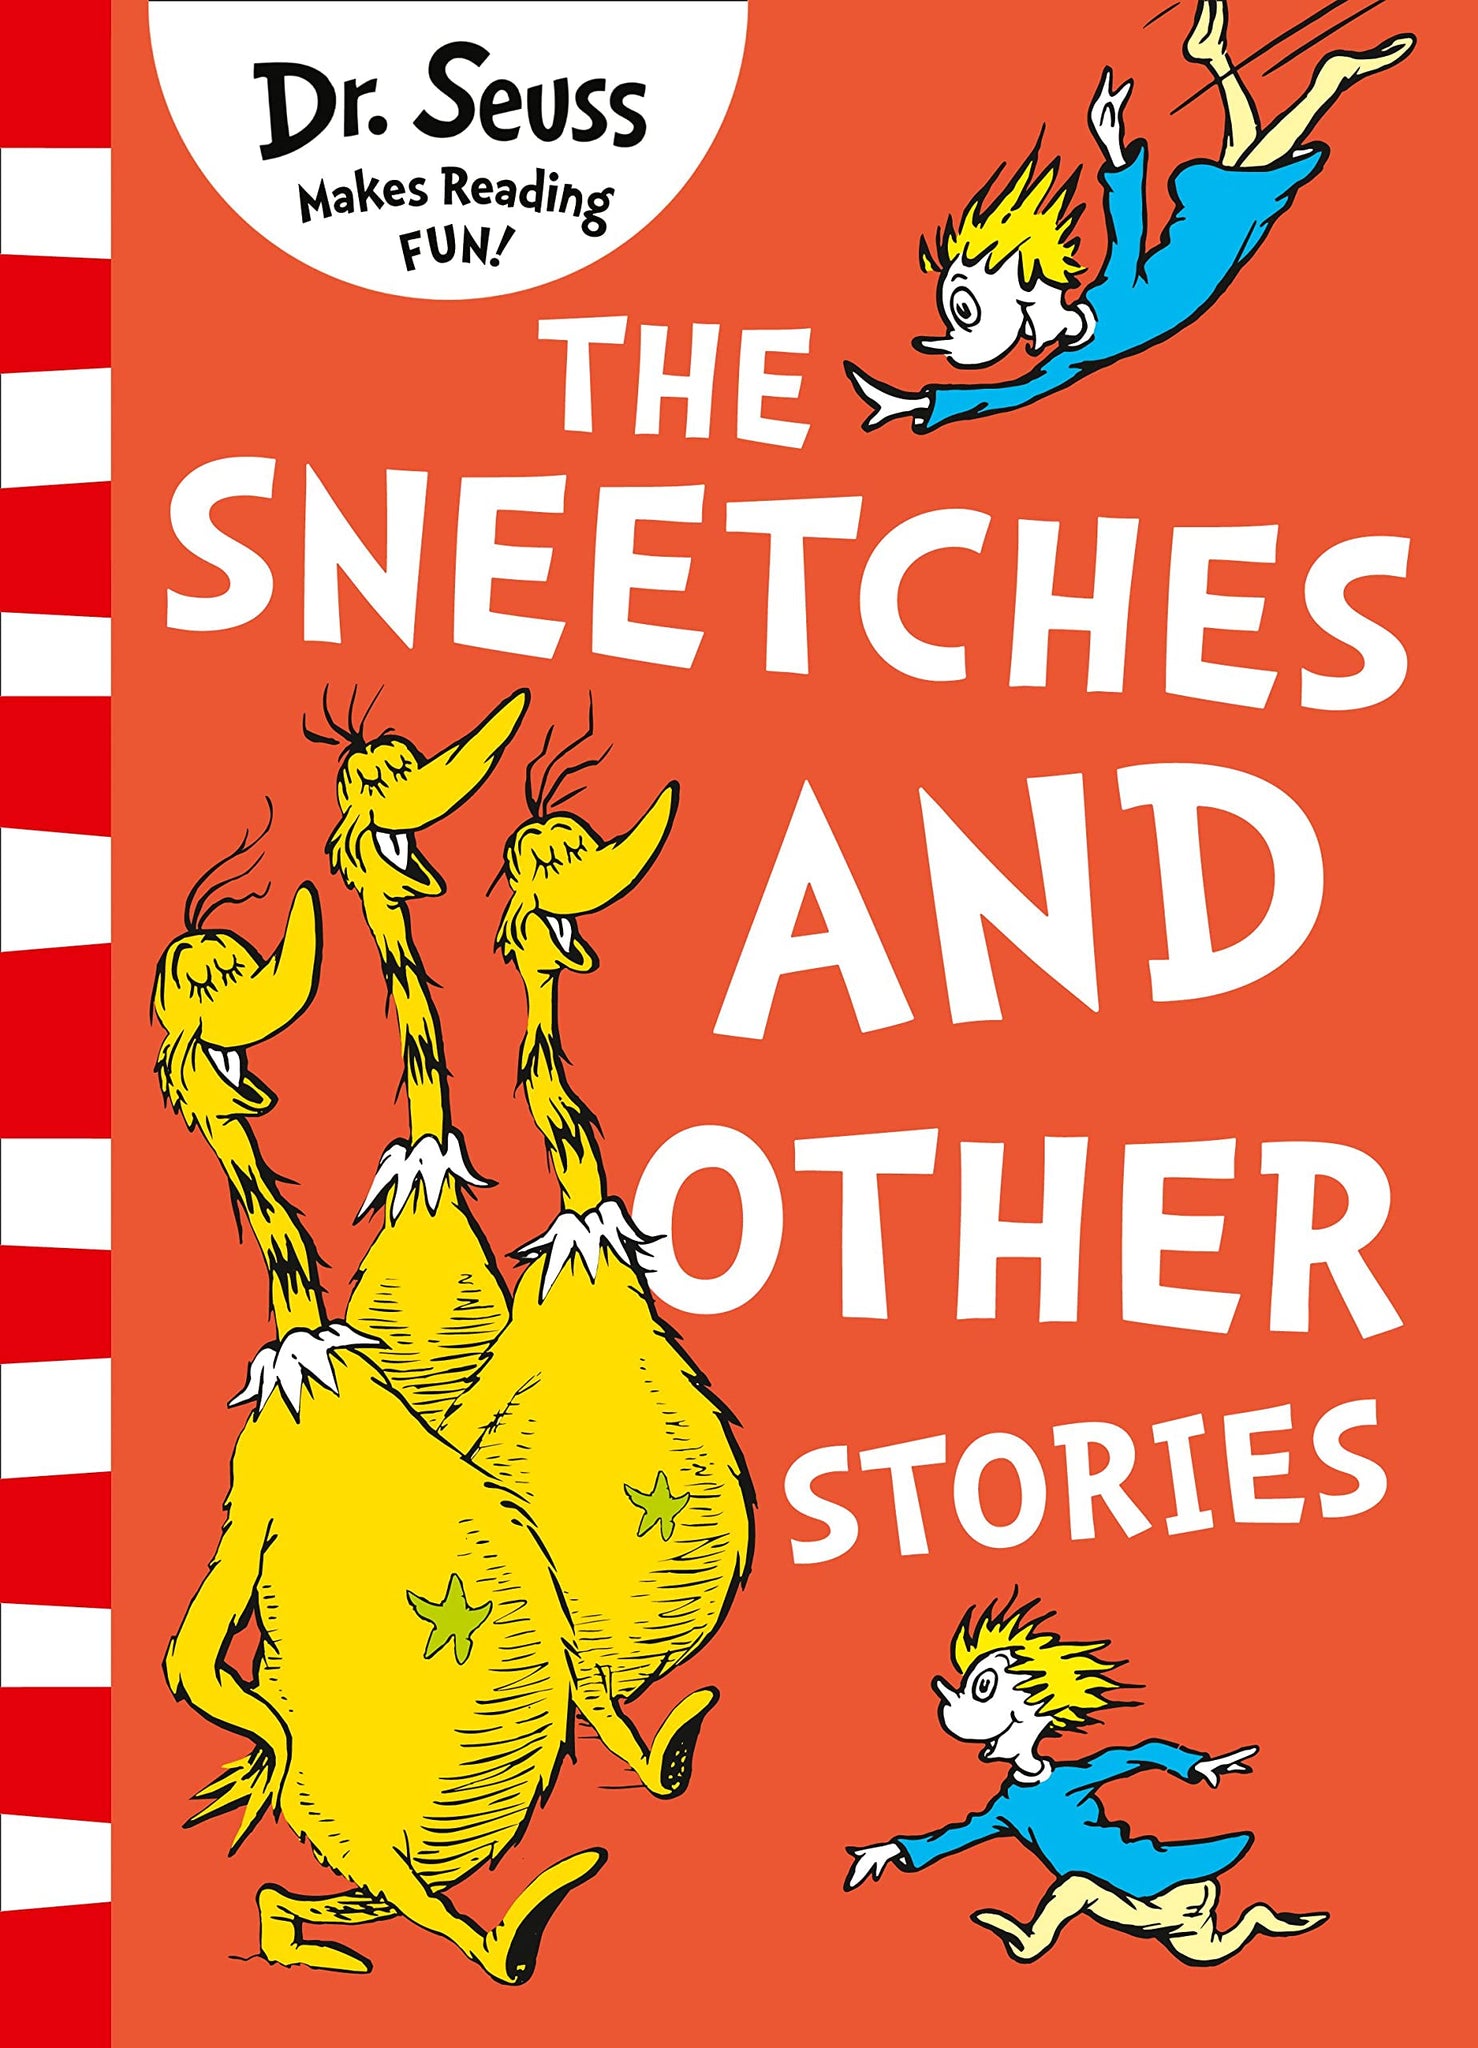 The Sneetches And Other